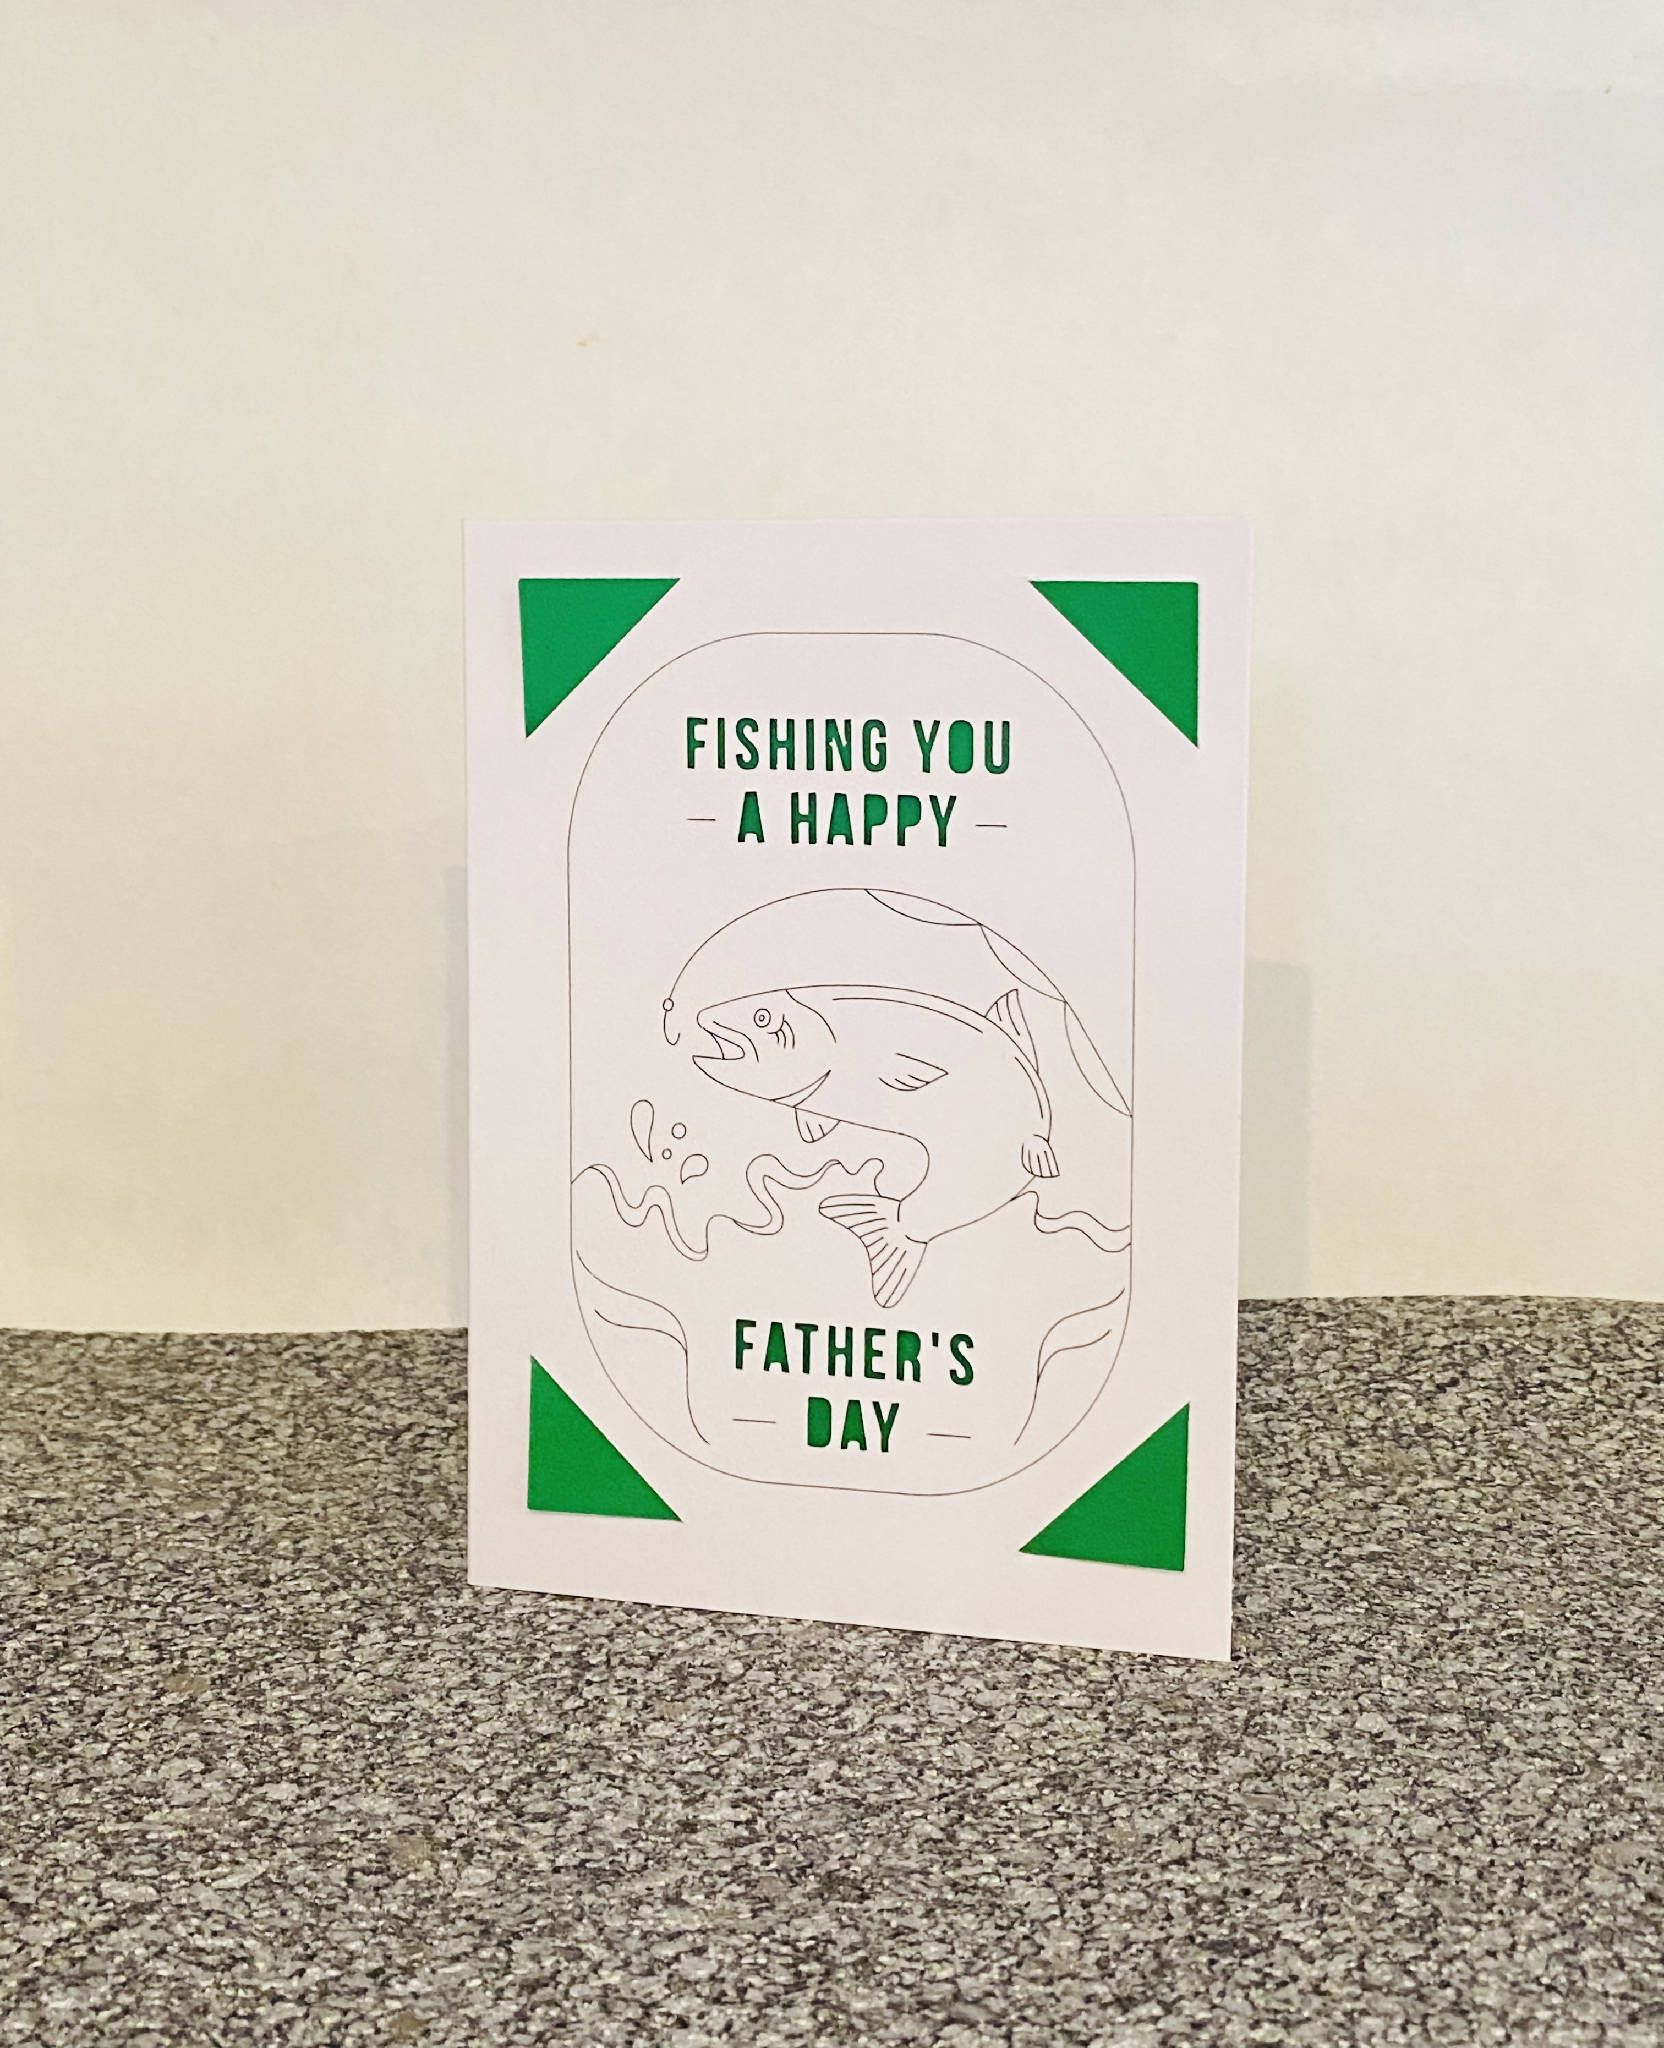 Fishing you a happy Father’s Day